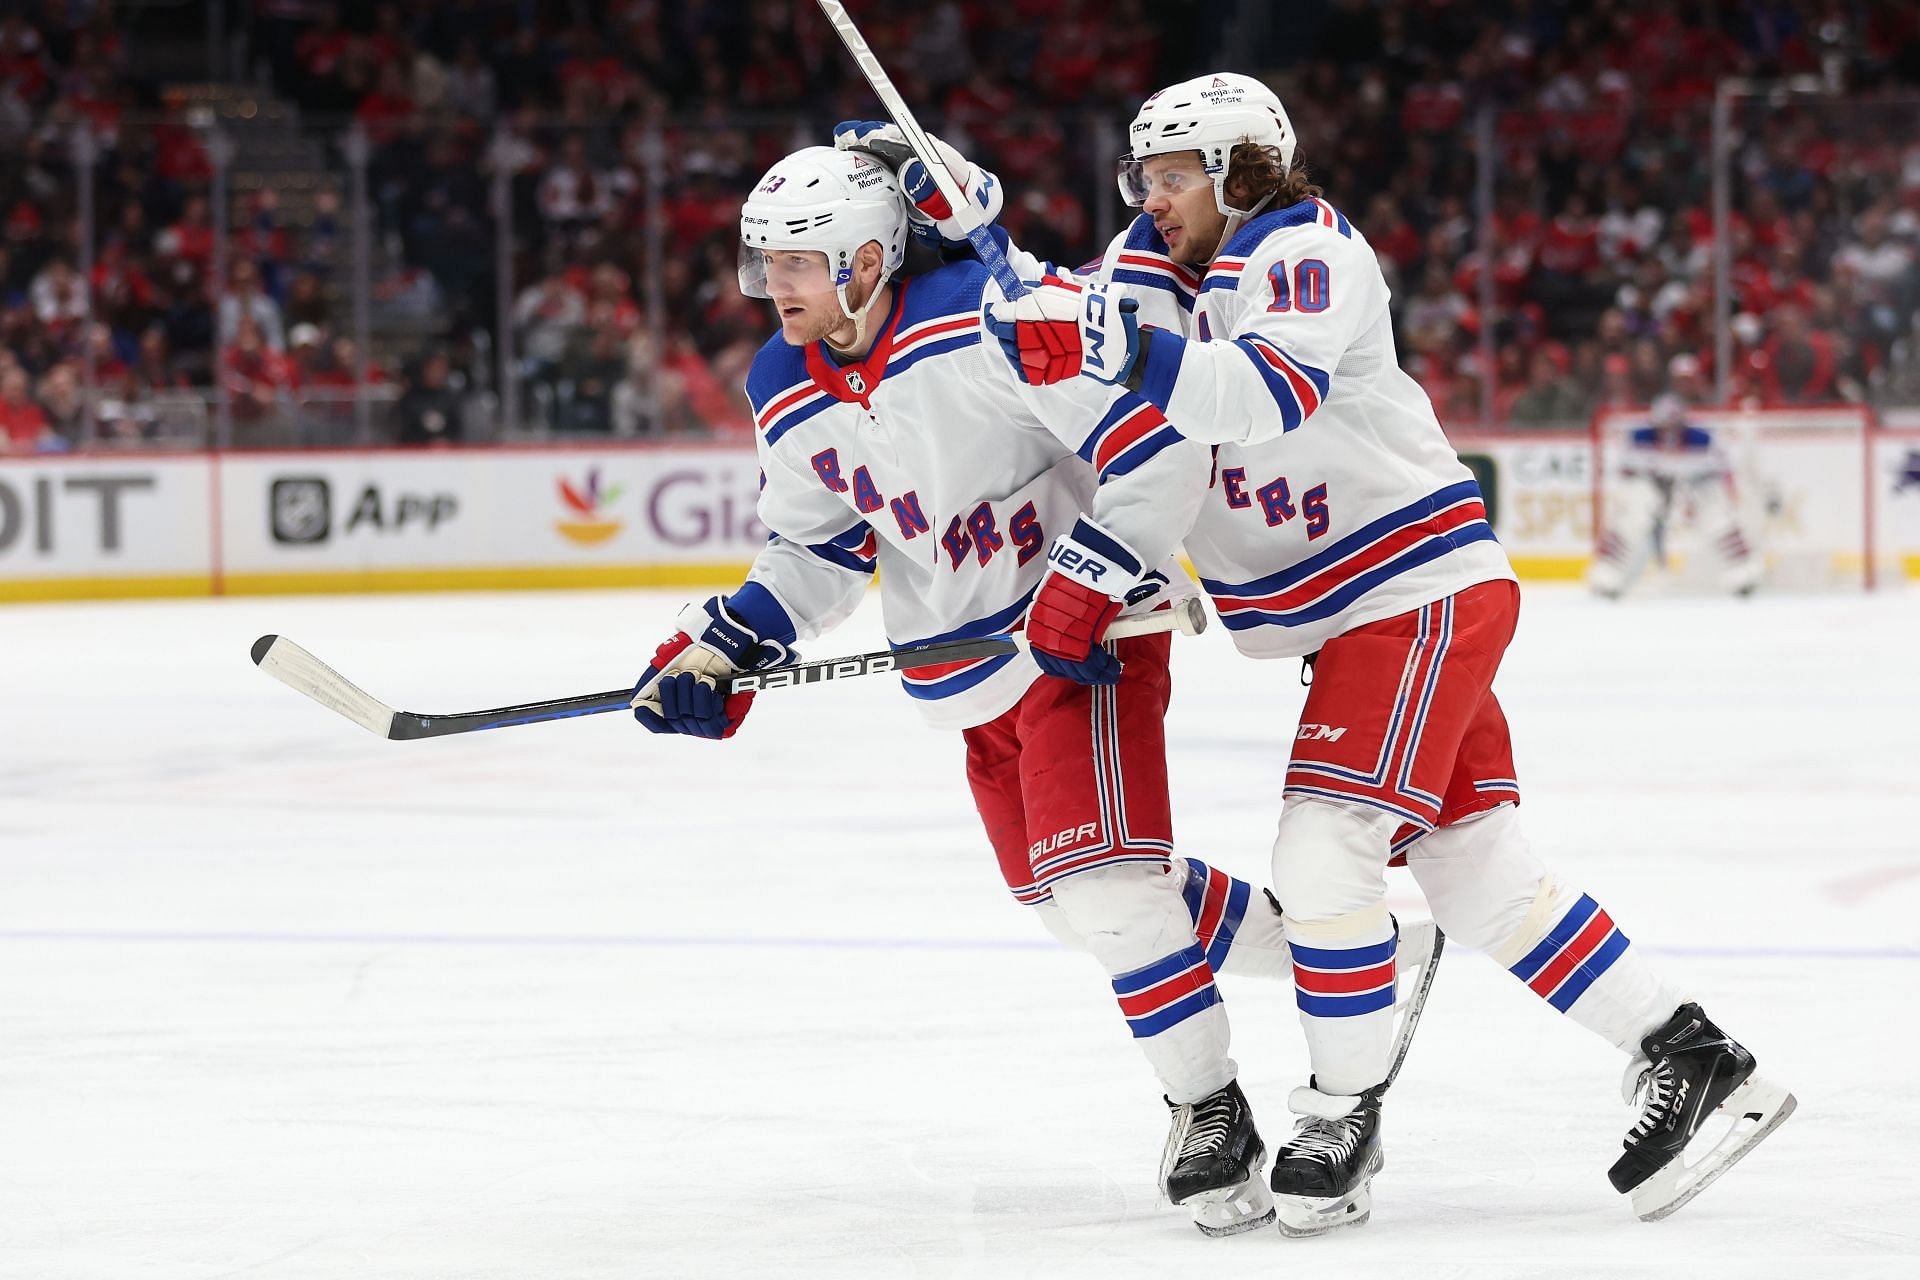 Artemi Panarin - NHL Left wing - News, Stats, Bio and more - The